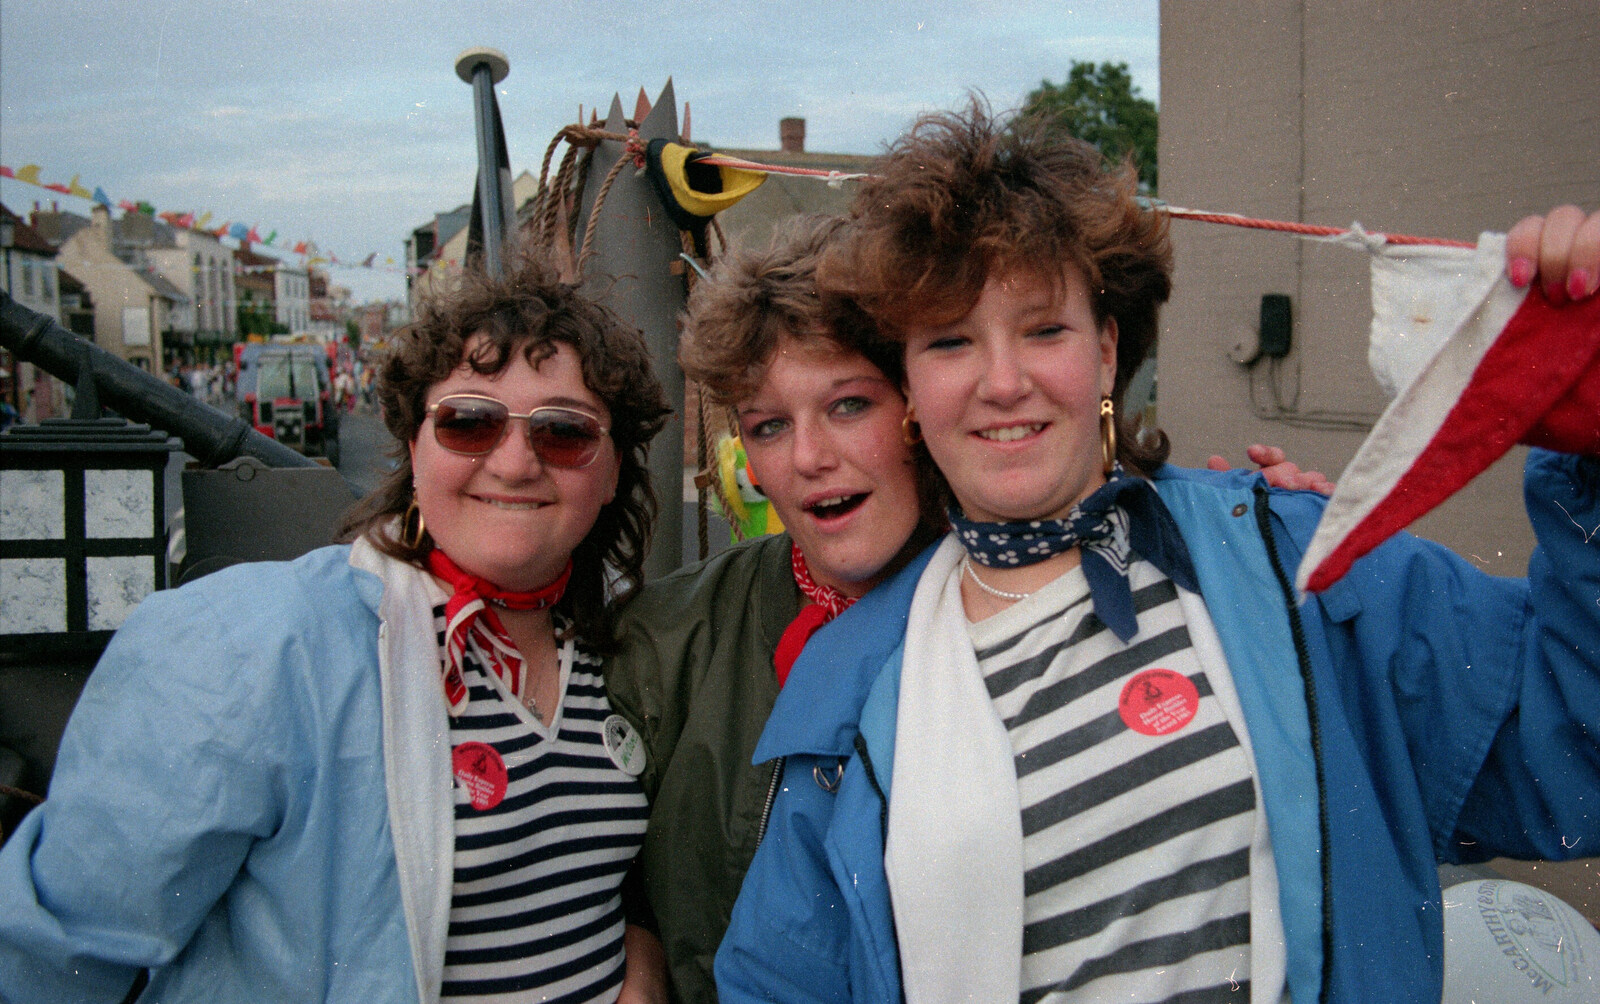 Some pirate girls from The Lymington Carnival, Hampshire - 17th June 1985